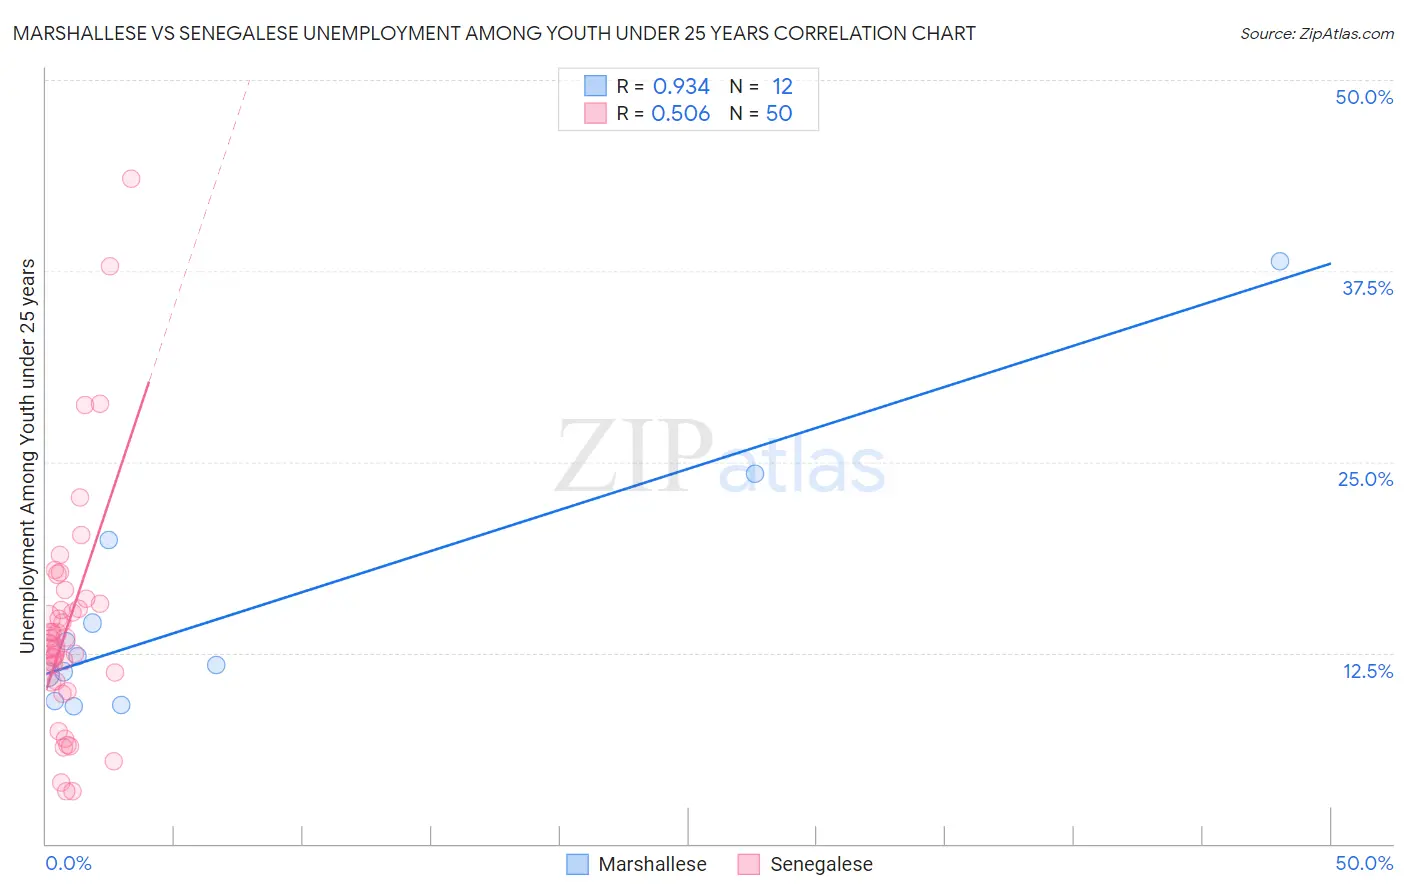 Marshallese vs Senegalese Unemployment Among Youth under 25 years